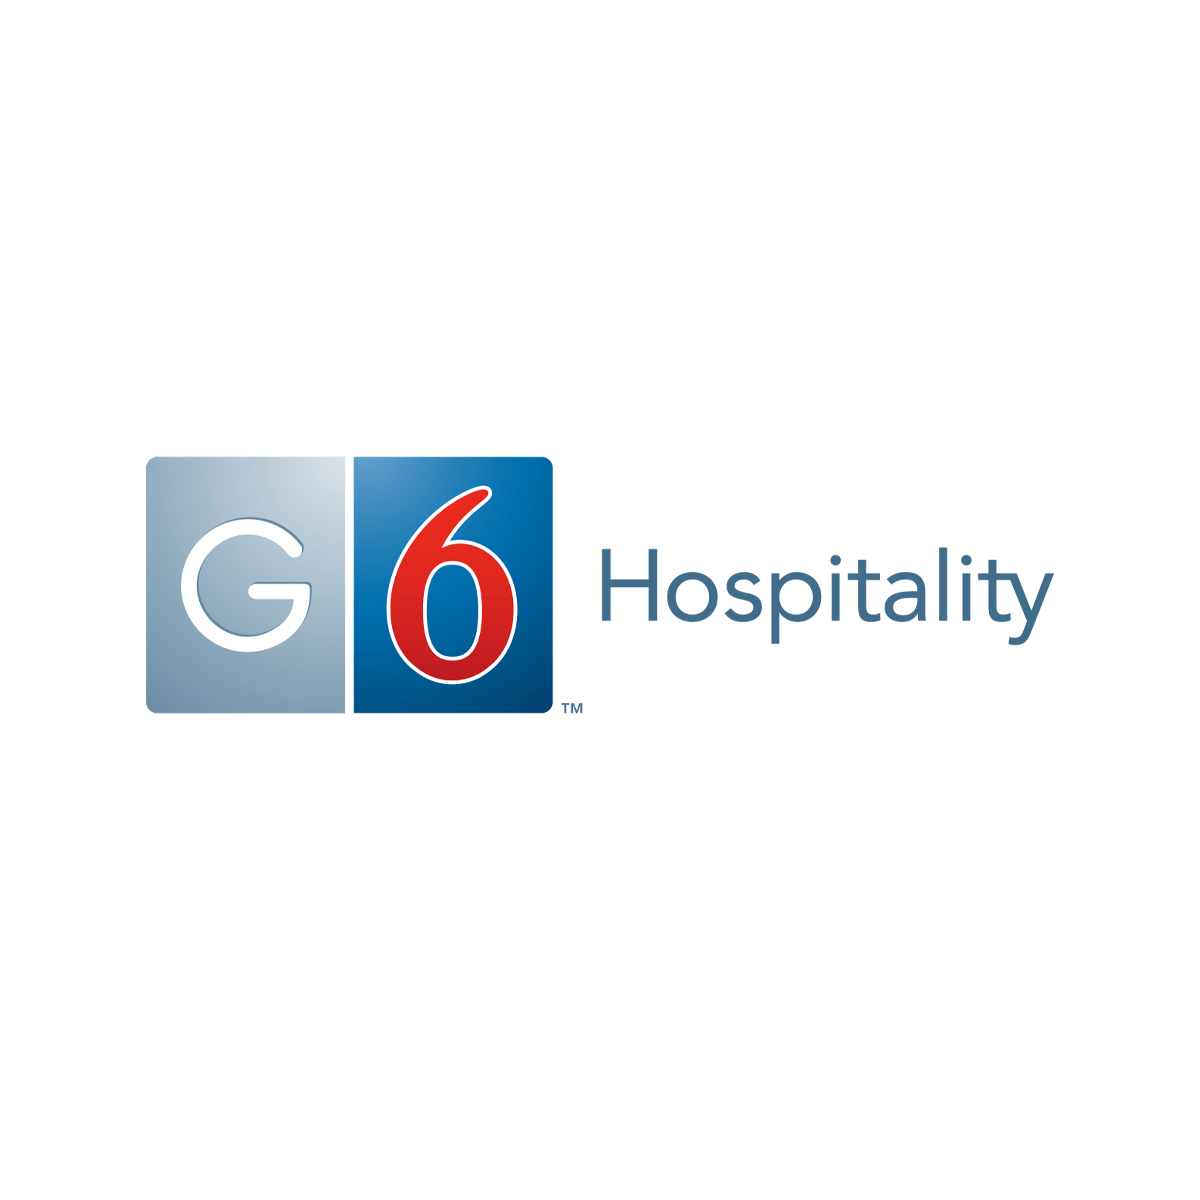 G6 Hospitality and Inkling